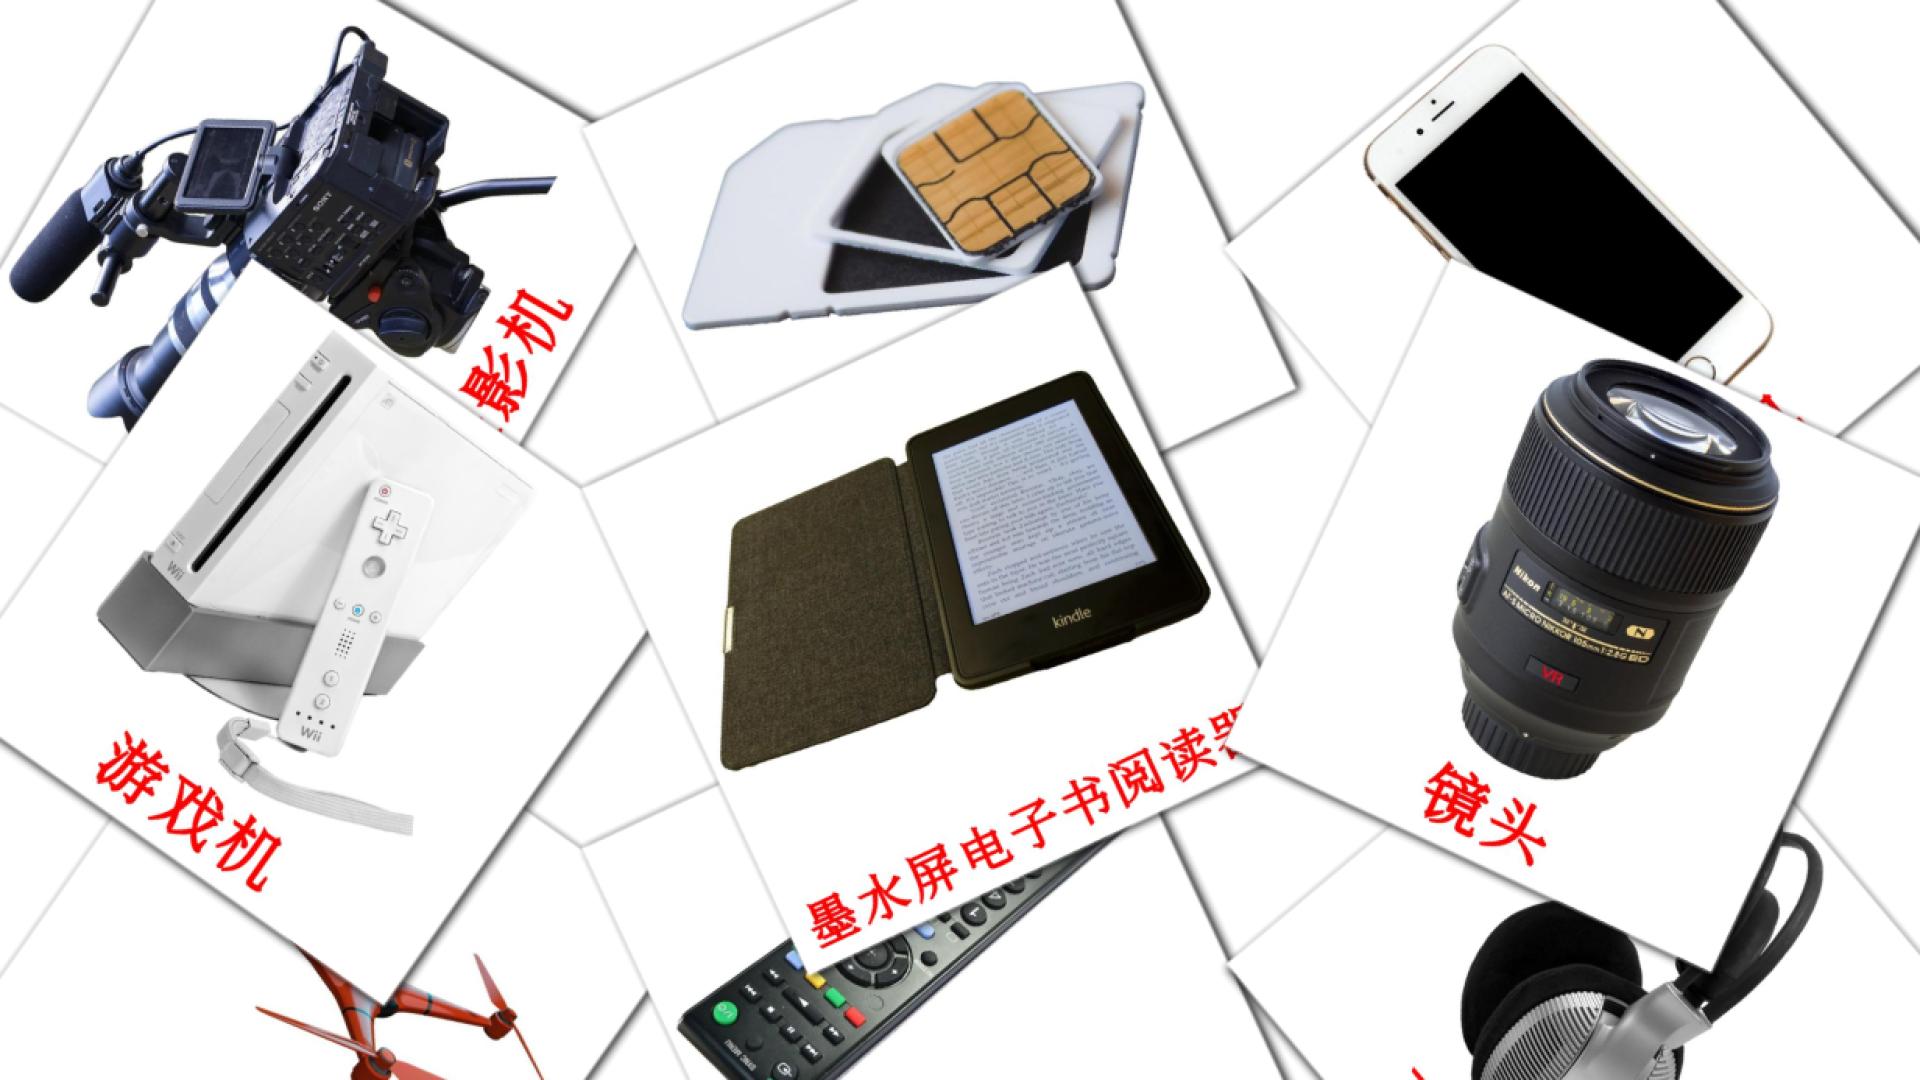 Gadgets - chinese(Simplified) vocabulary cards